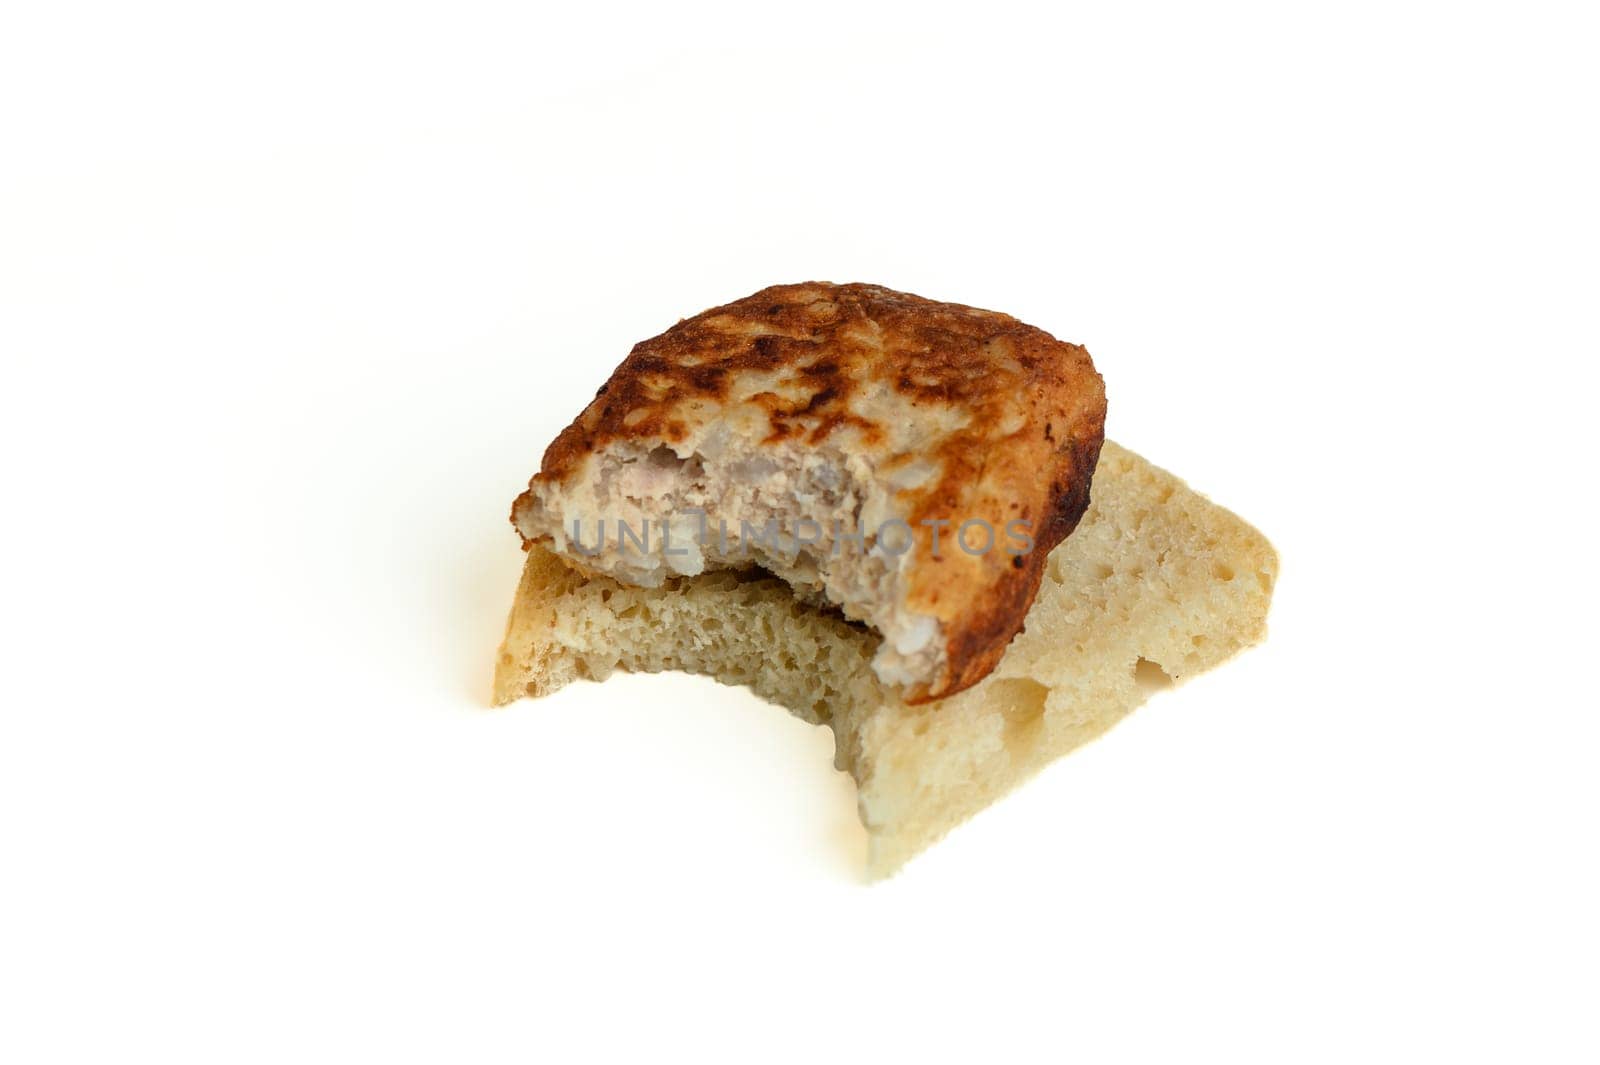 fish cutlet on a piece of bread, bitten off